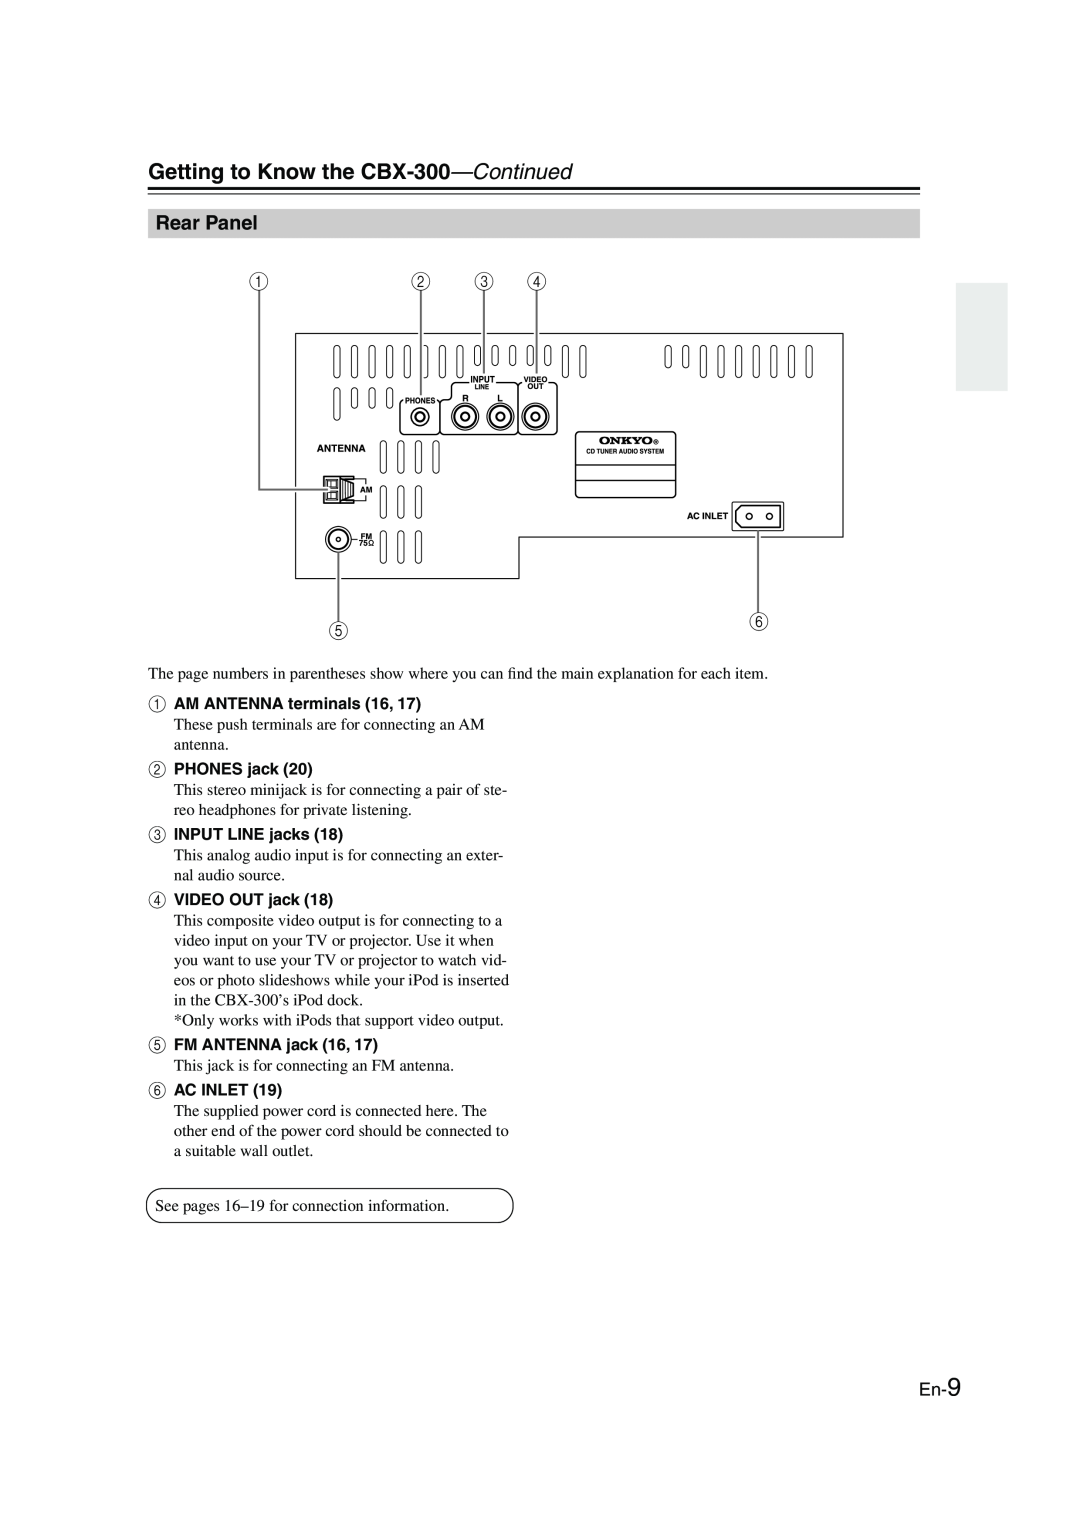 Onkyo instruction manual Rear Panel, En-9, Getting to Know the CBX-300—Continued 